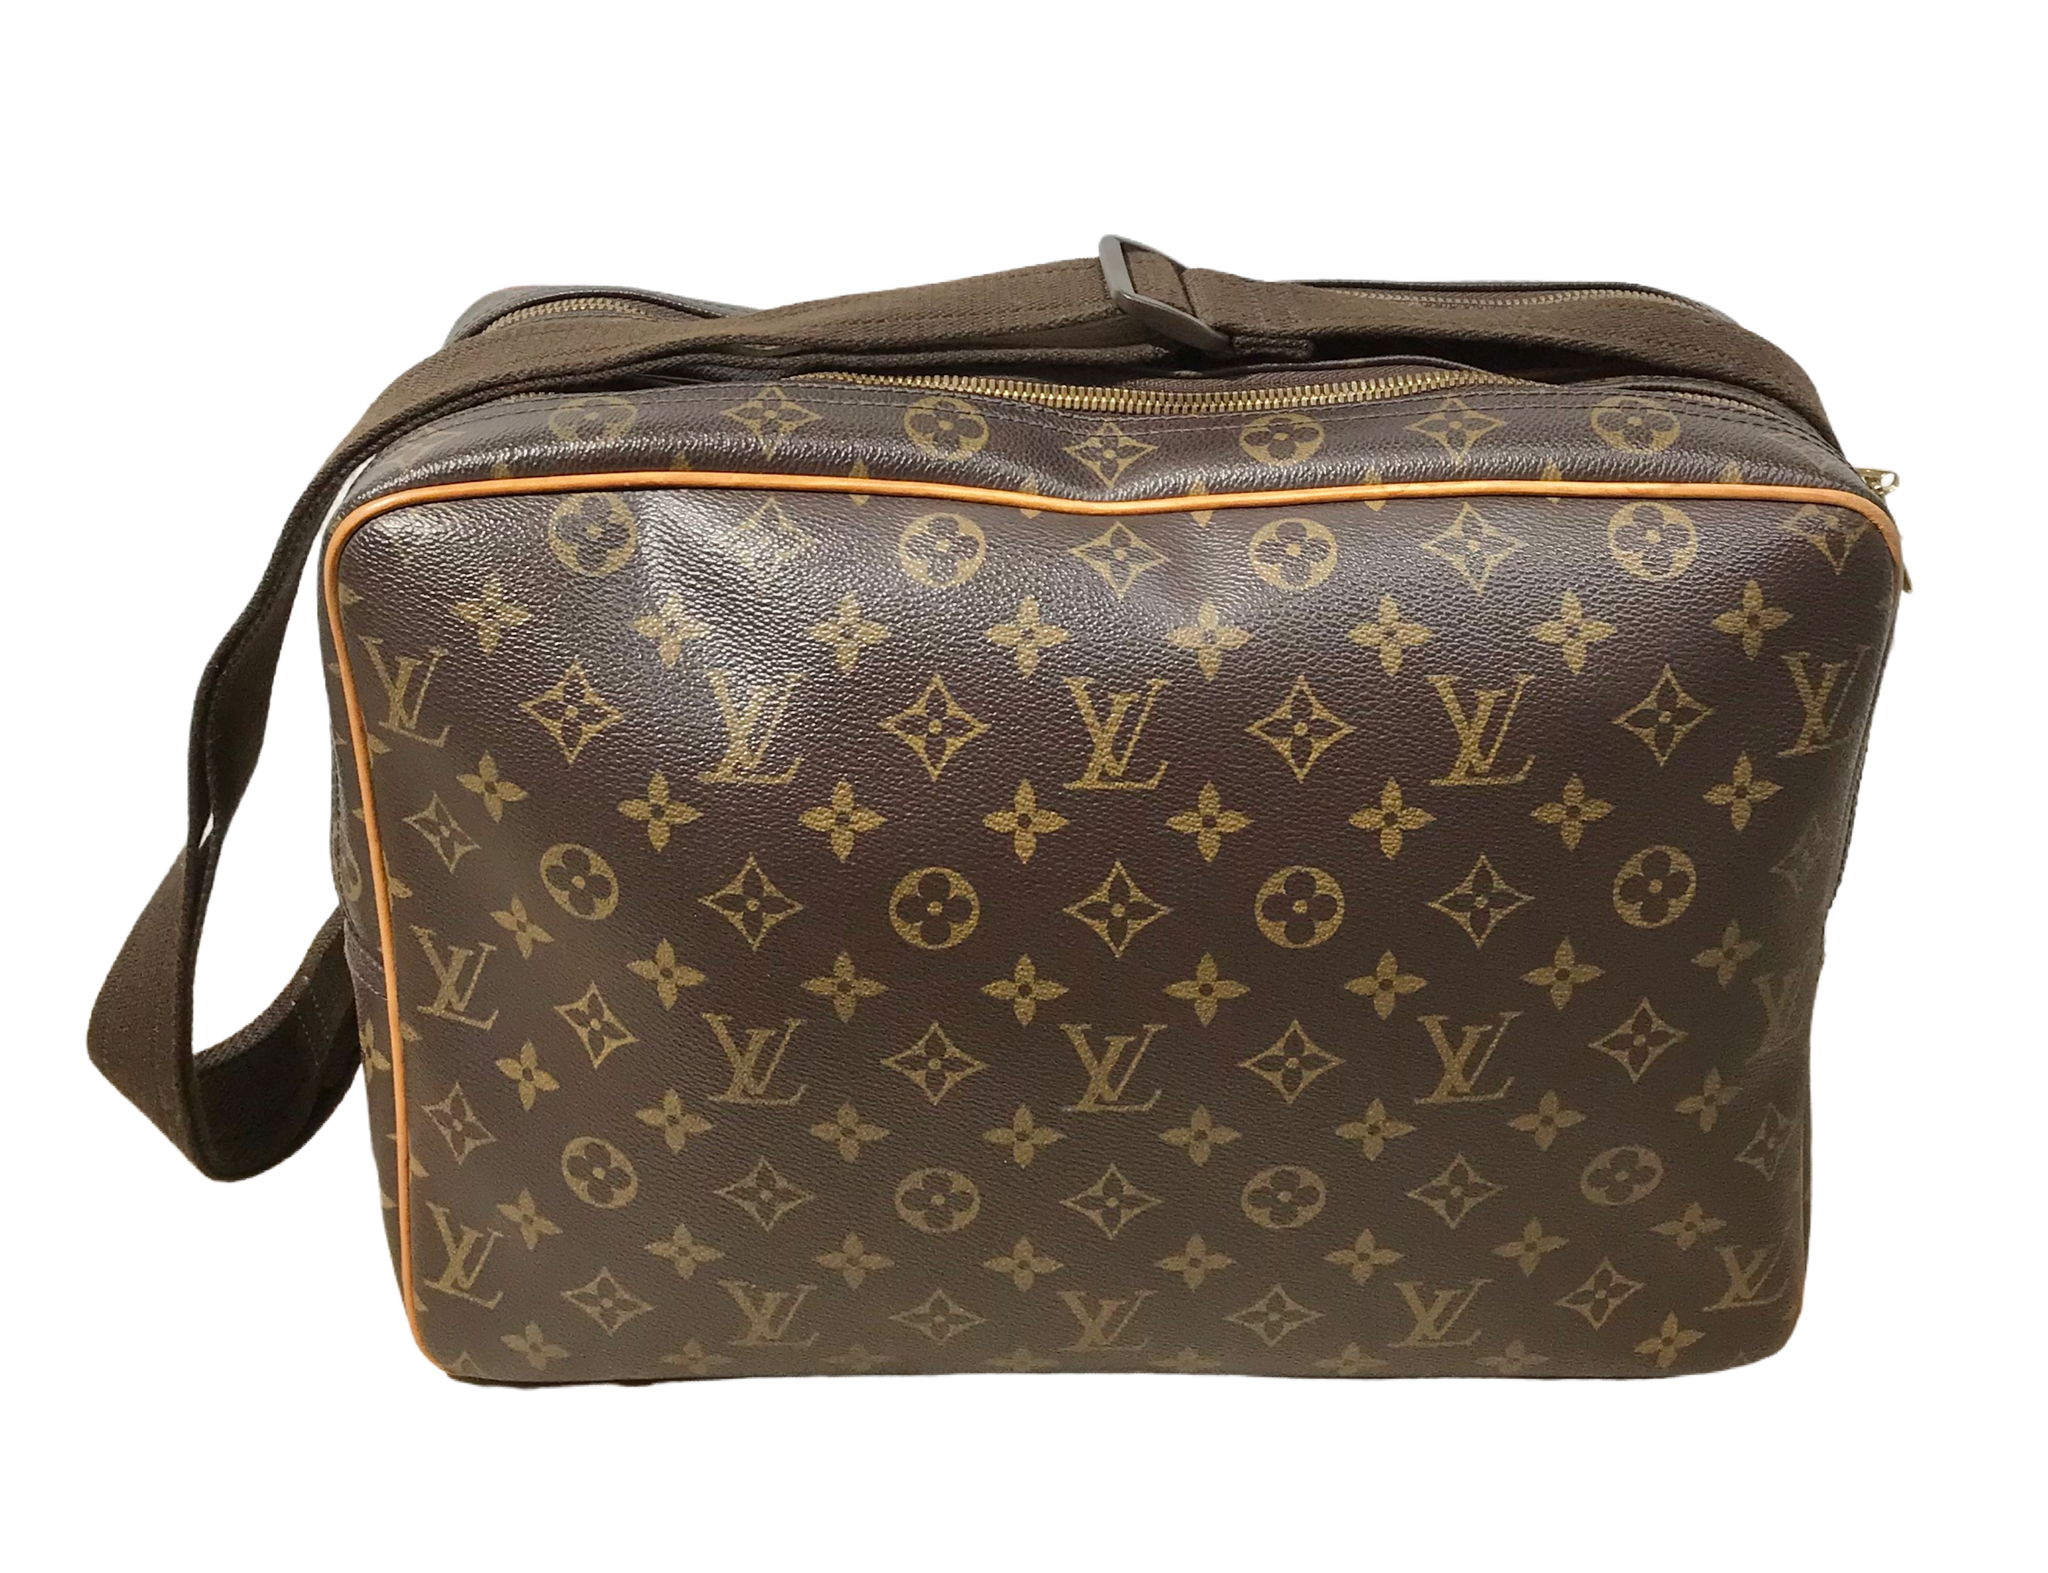 Louis Vuitton - Authenticated Reporter Handbag - Leather Brown for Women, Very Good Condition